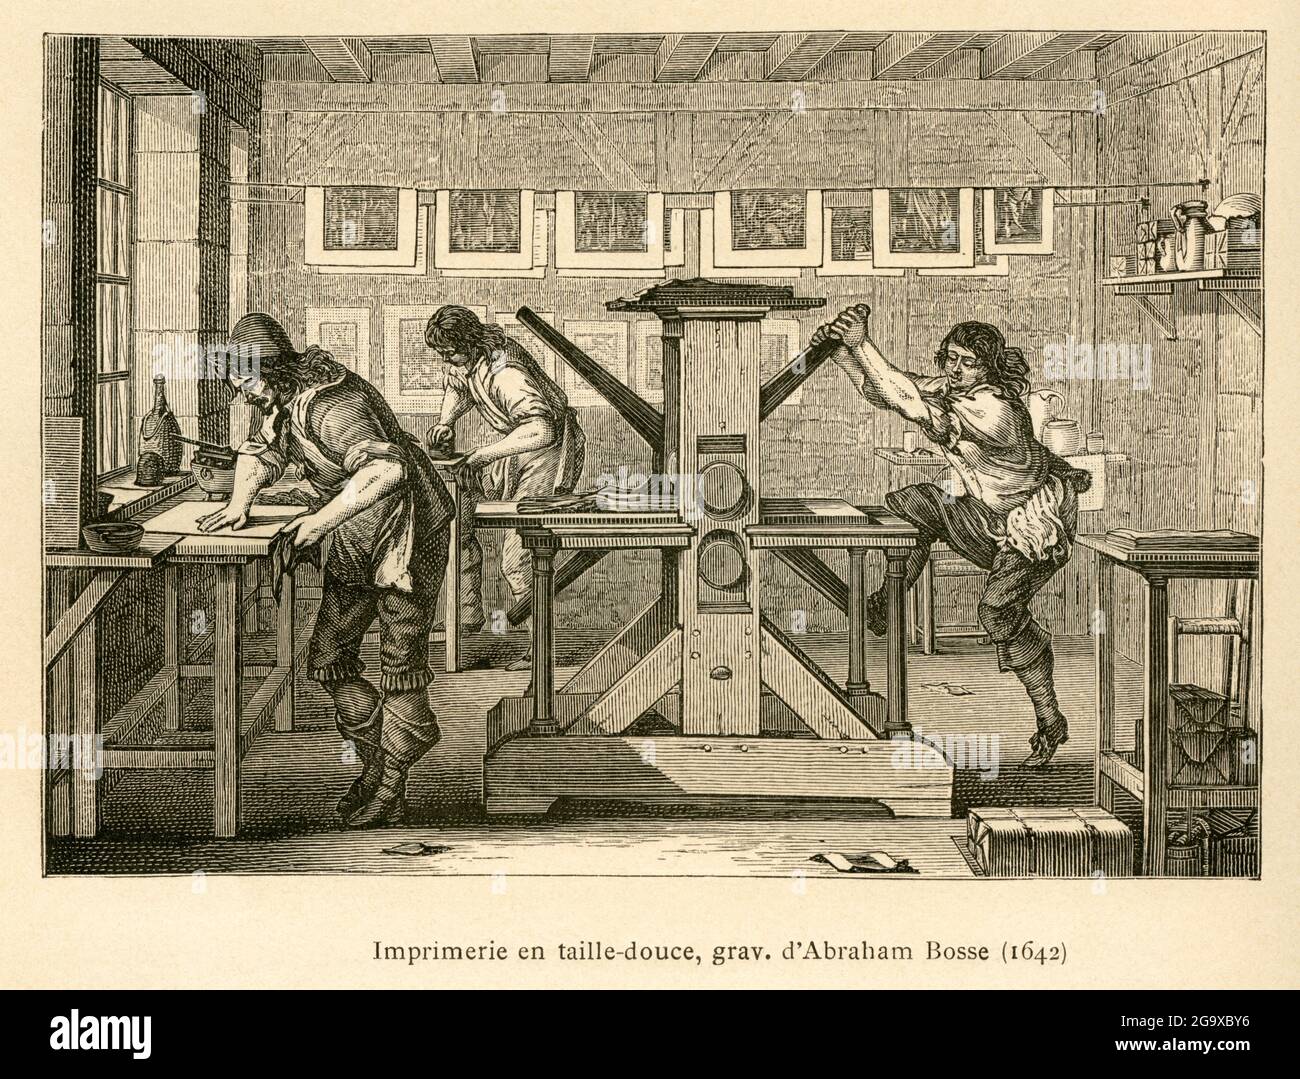 printing house ( gravure printing ), by Abraham Bosse, 17th century , ADDITIONAL-RIGHTS-CLEARANCE-INFO-NOT-AVAILABLE Stock Photo